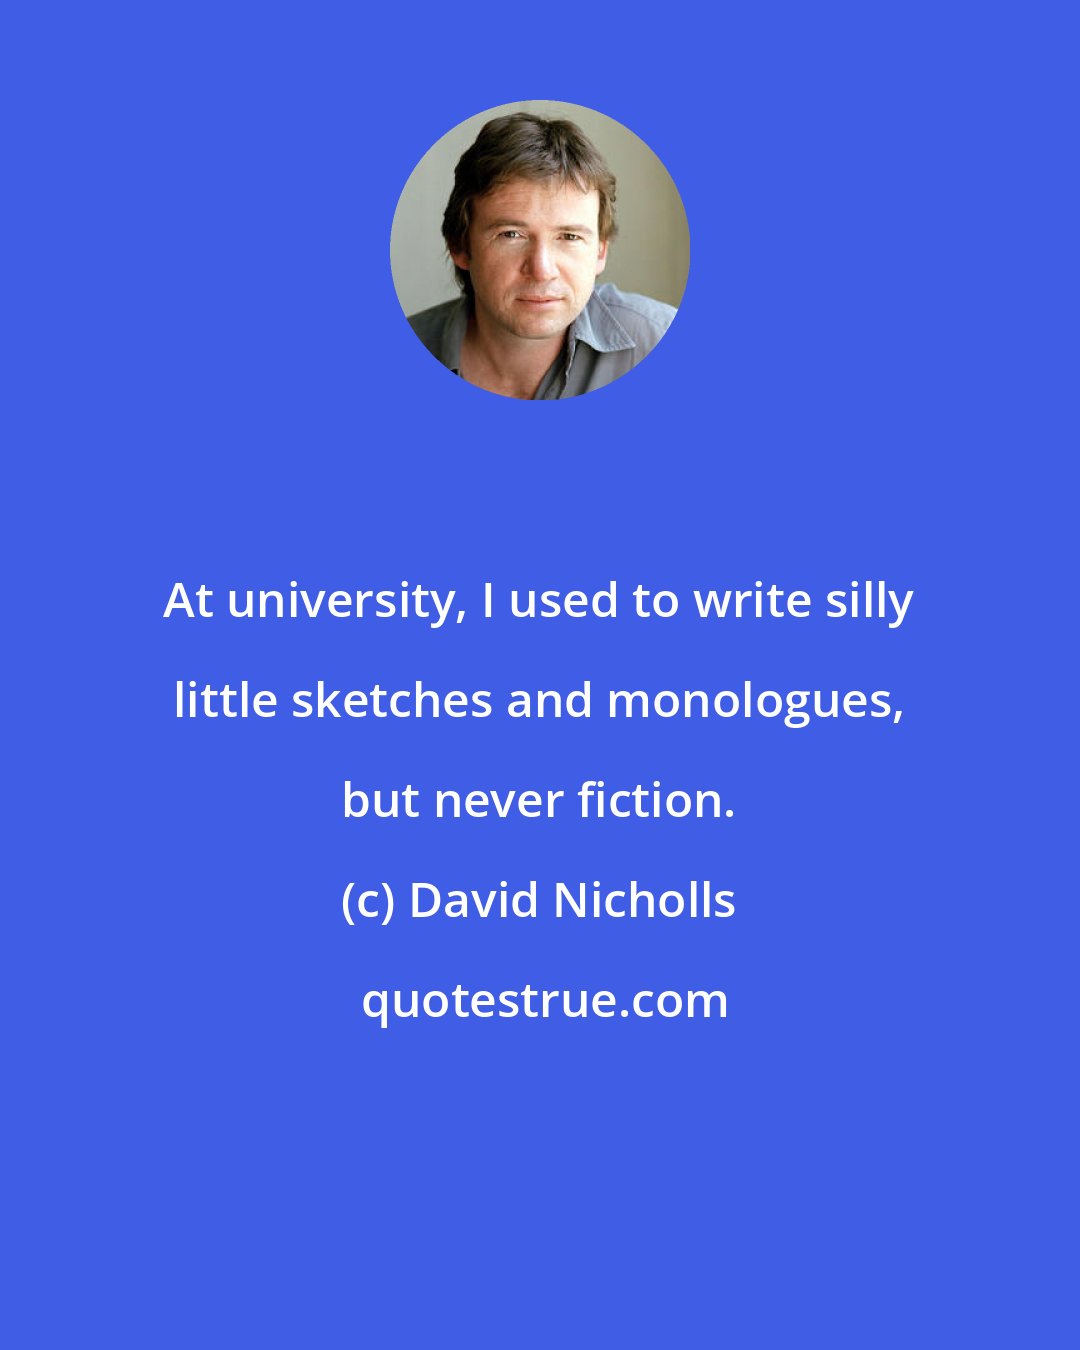 David Nicholls: At university, I used to write silly little sketches and monologues, but never fiction.